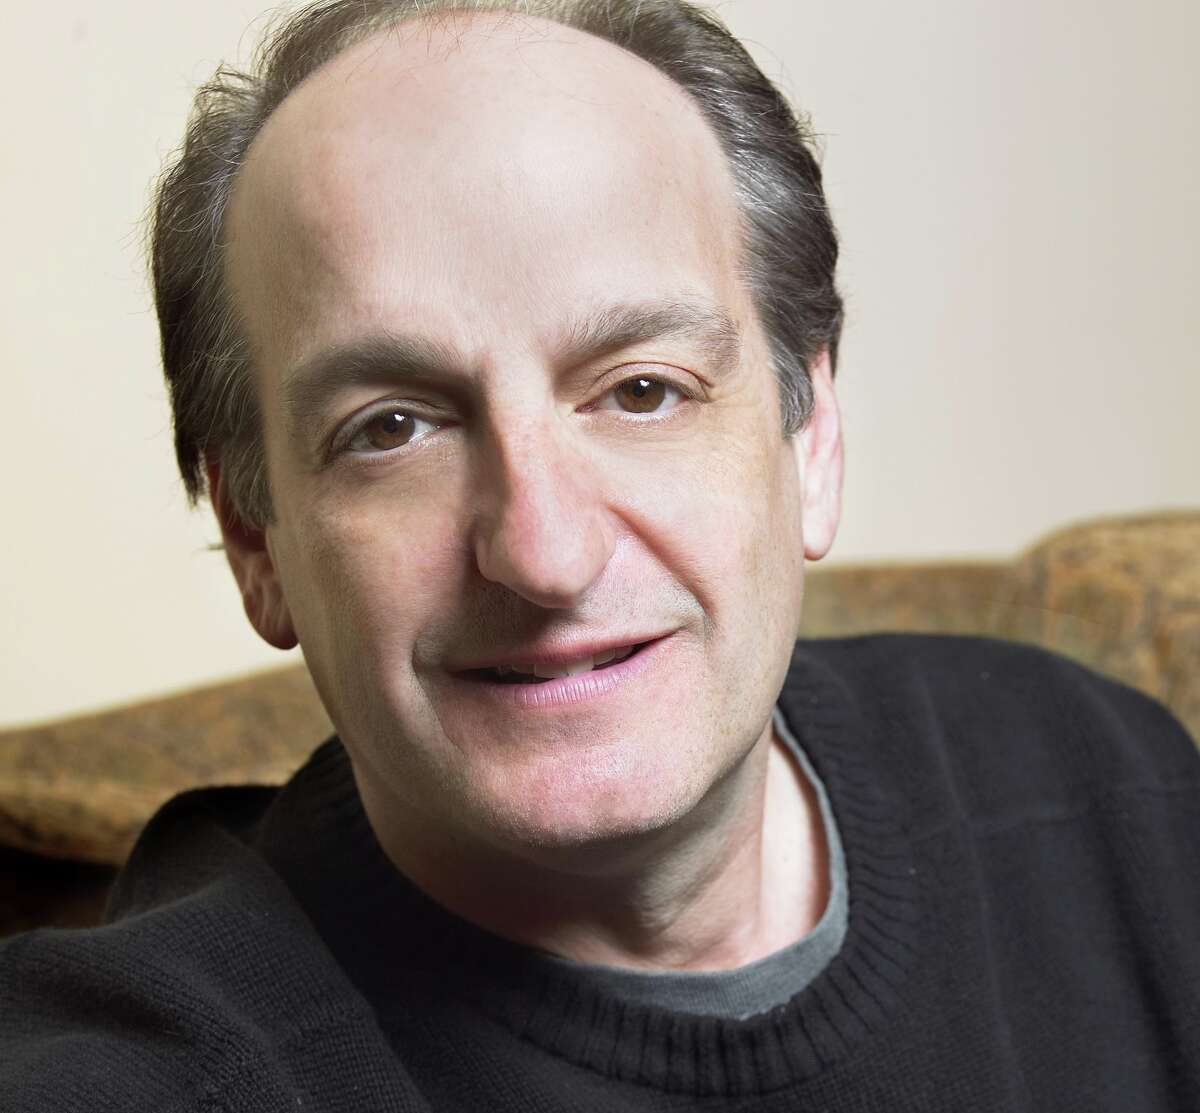 David Paymer, who earned an Oscar nomination for playing the brother of Billy Crystal's character in the 1992 movie "Mr. Saturday Night," will reprise the role opposite Crystal in a new musical adaptation of the movie being workshopped at Barrington Stage Company in Pittsfield, Mass., from Oct, 23 to 30.